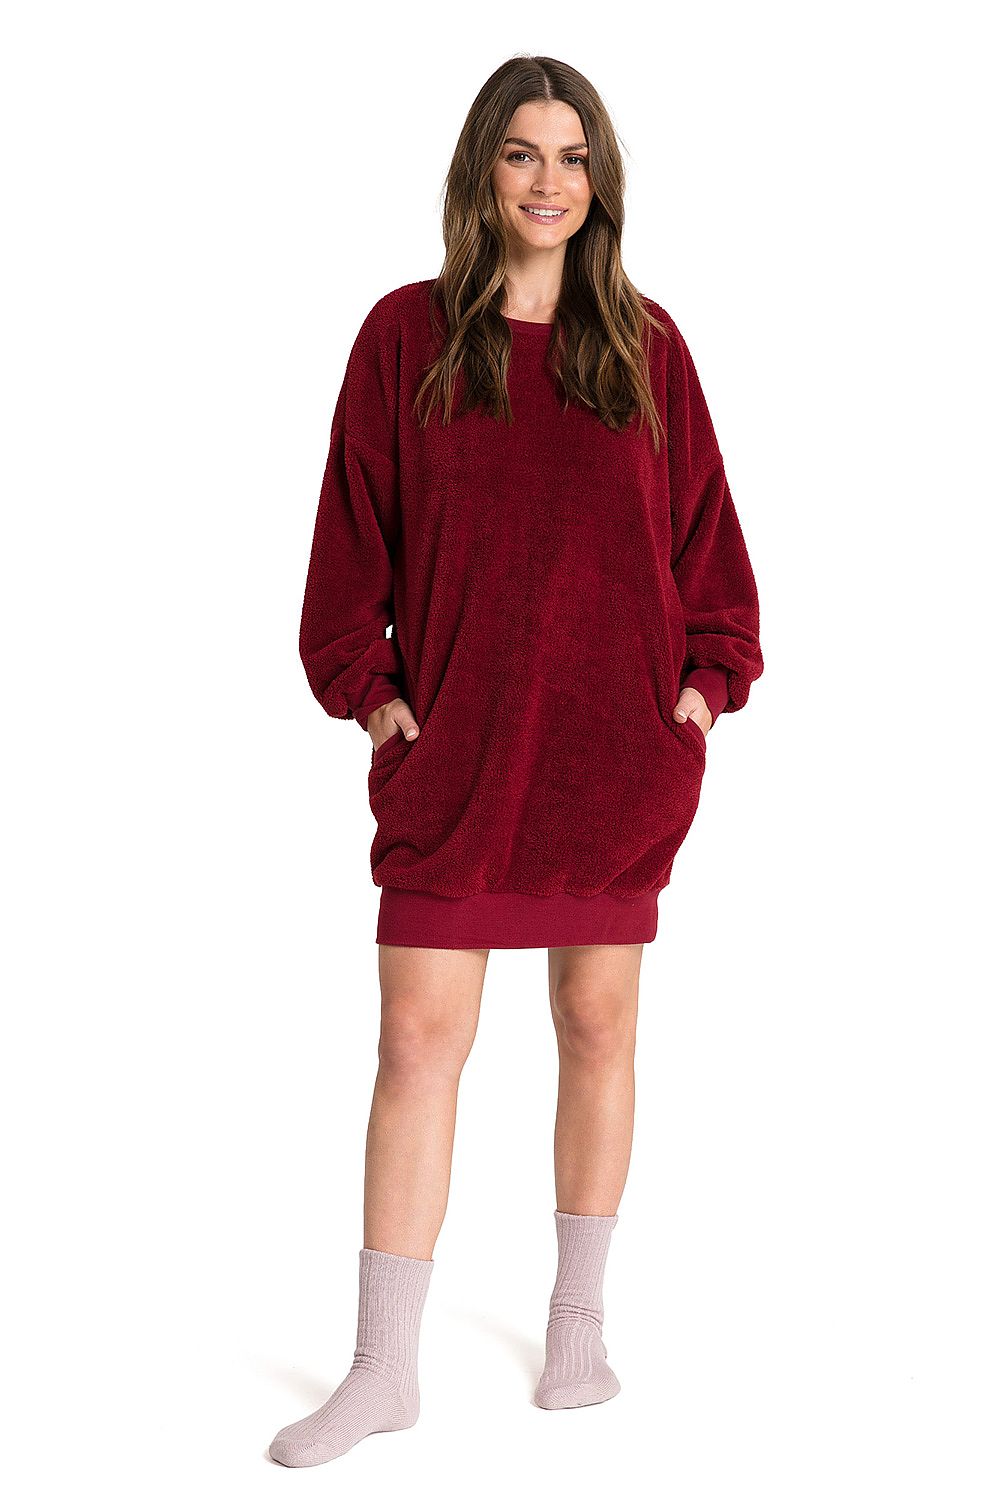 LaLupa Relaxed Fit Tunic Dress Burgundy